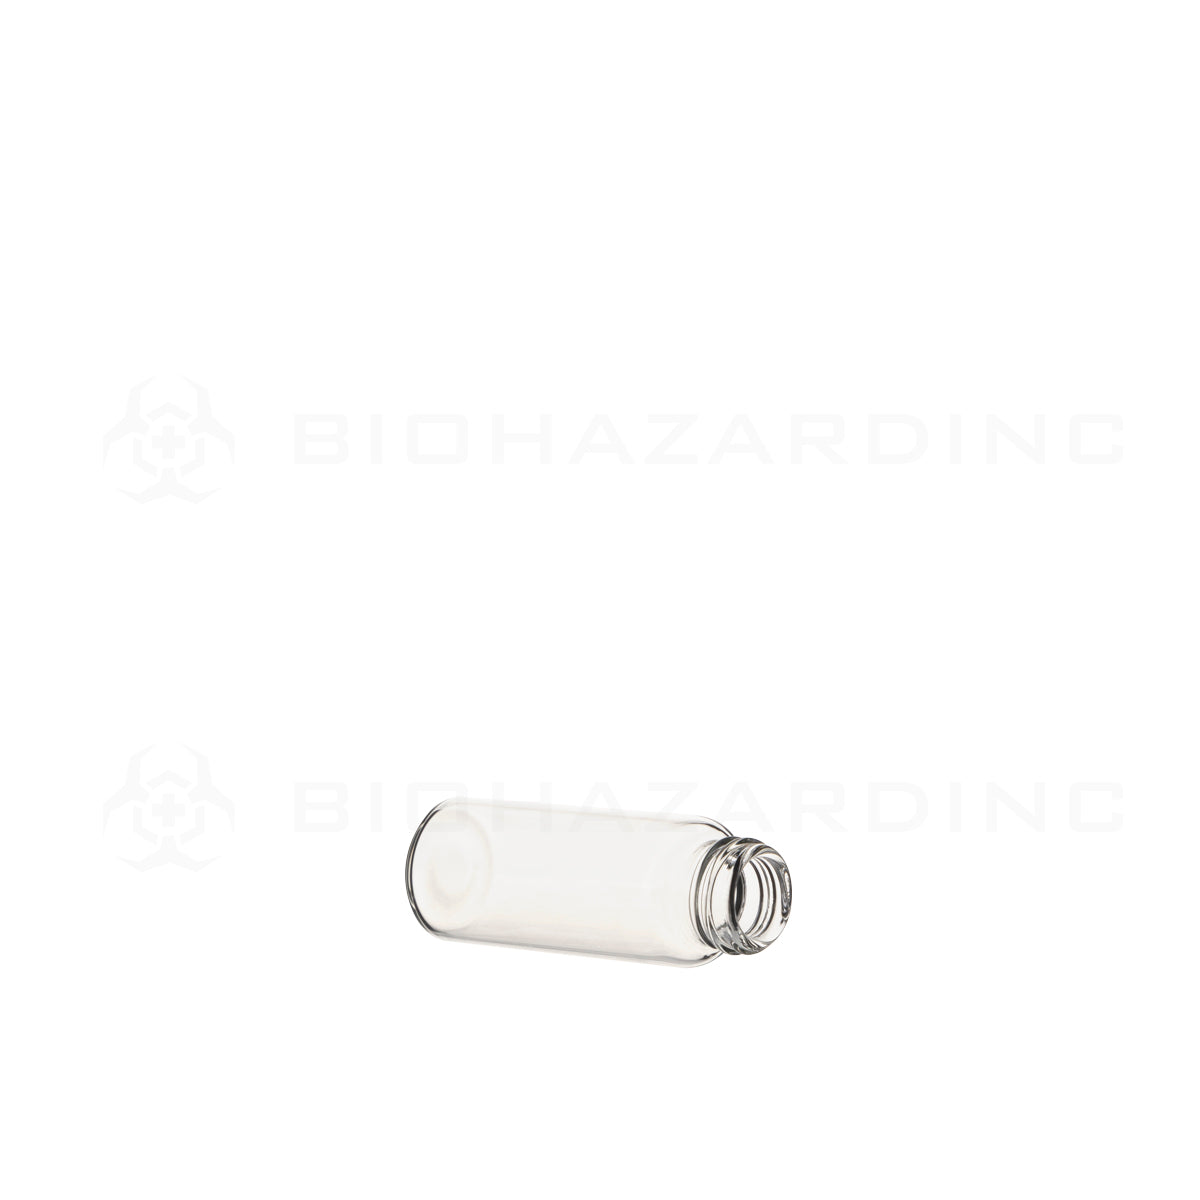 Glass Vial | Concentrate Container 50mm Tall | 15mm - 2 Dram - 298 Count Glass Vial Biohazard Inc   